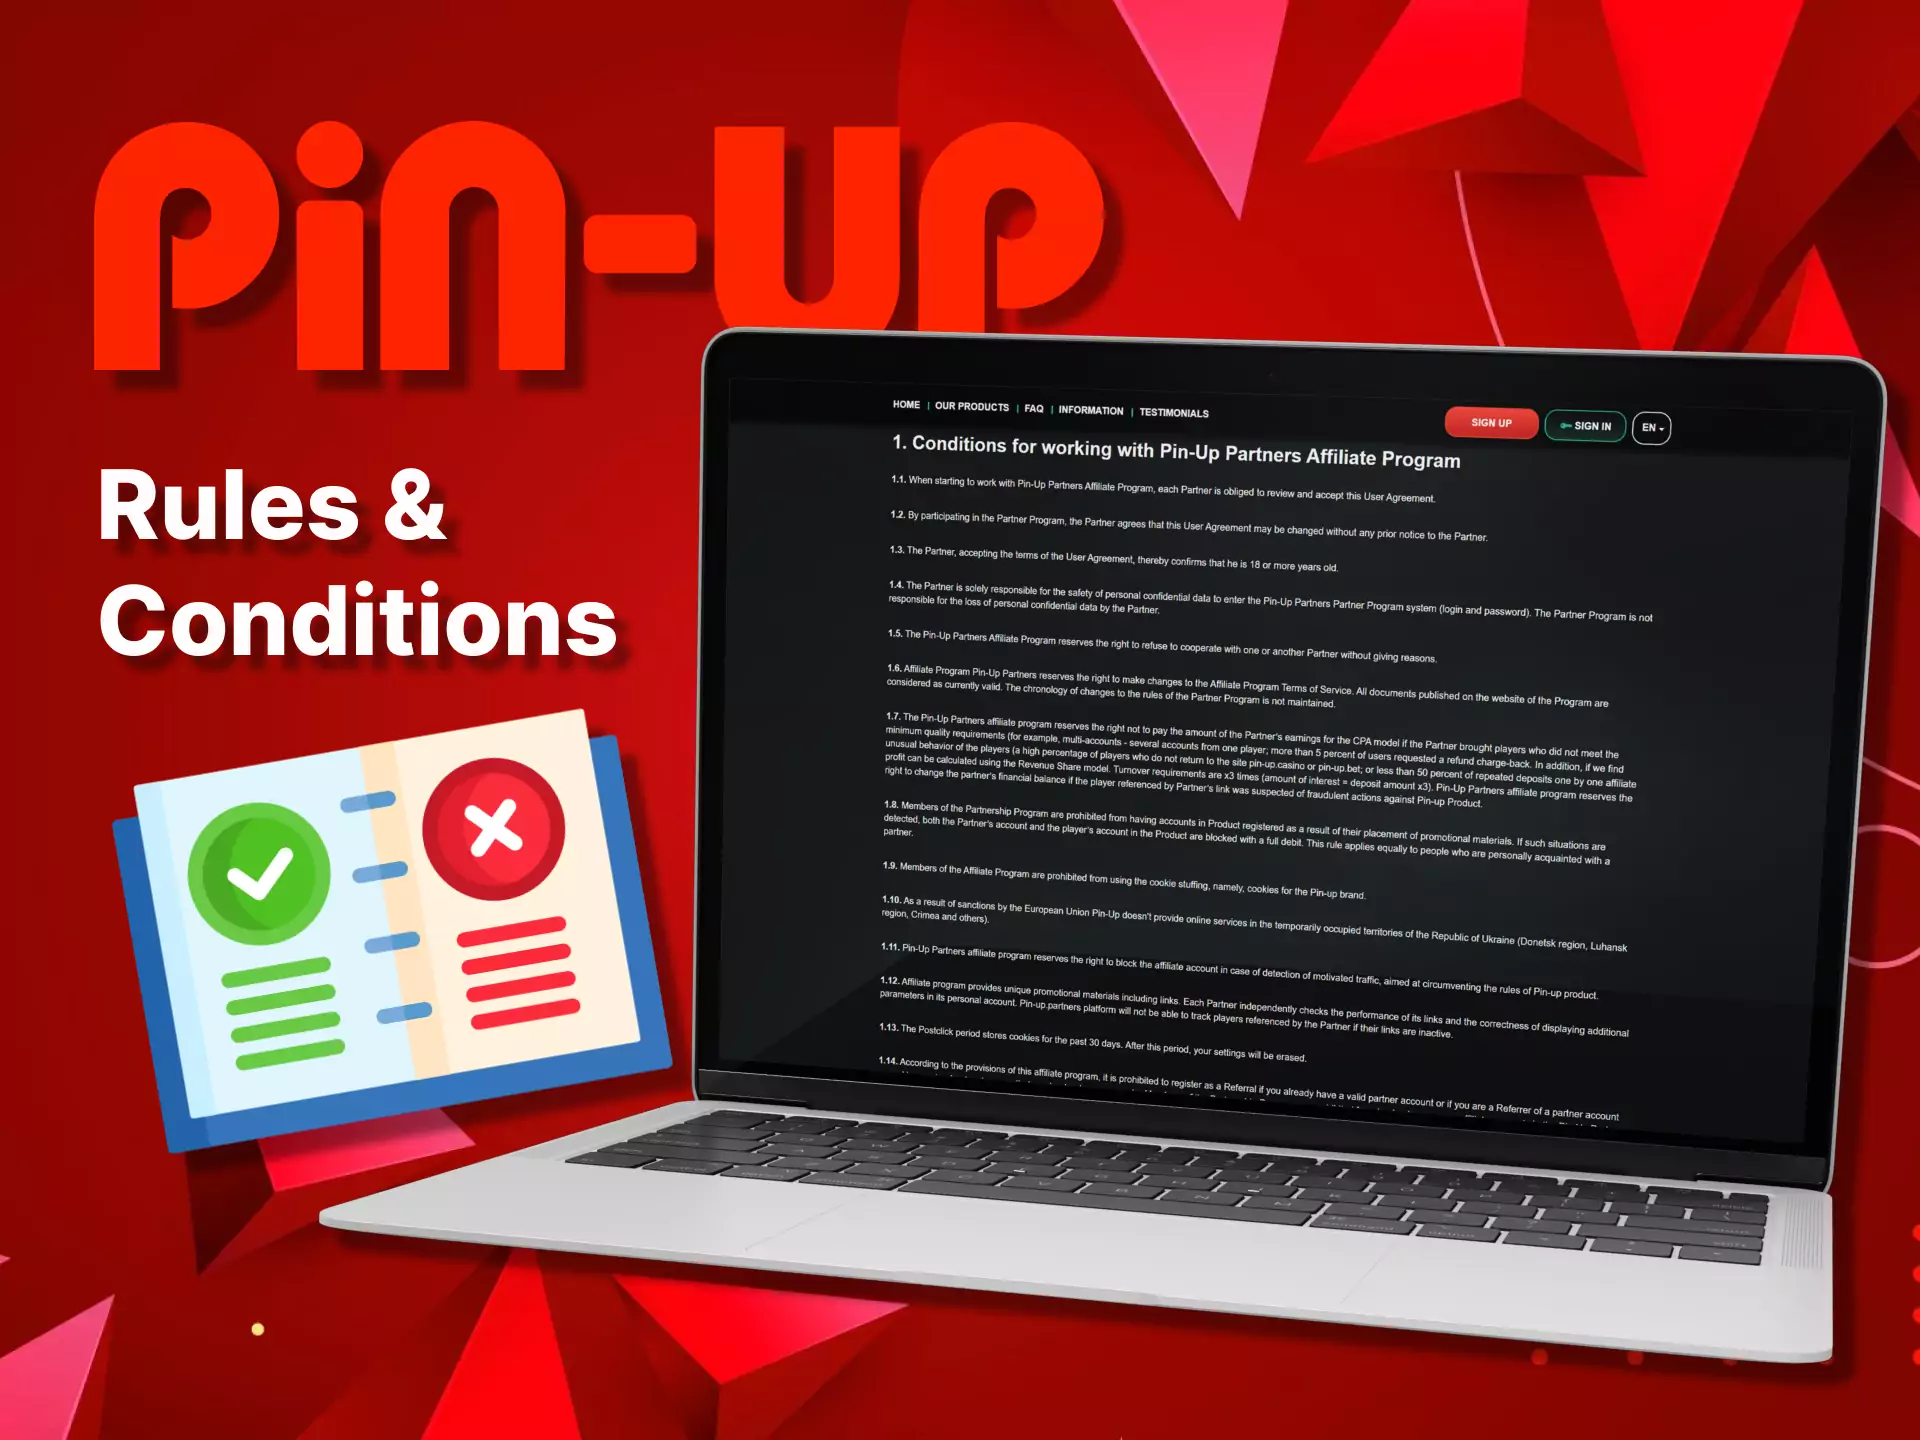 Read the rules and conditions of the Pin-Up Affiliate Program.